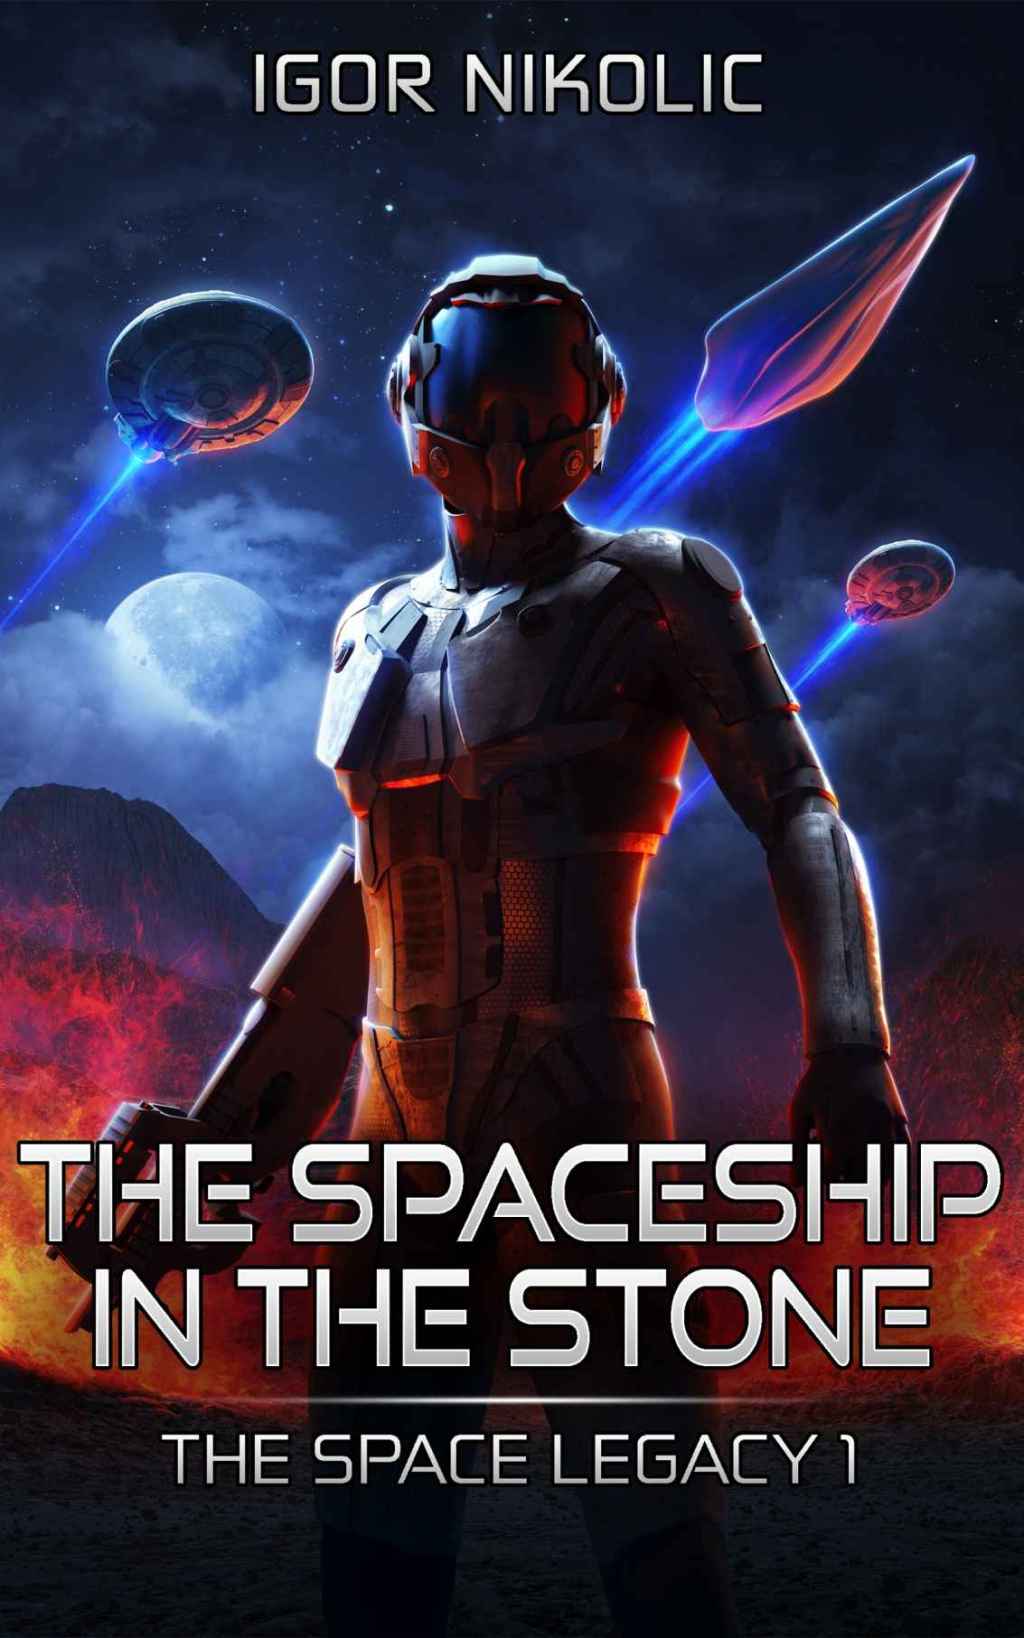 The Spaceship in the Stone – Fun read but not as good as I hoped.